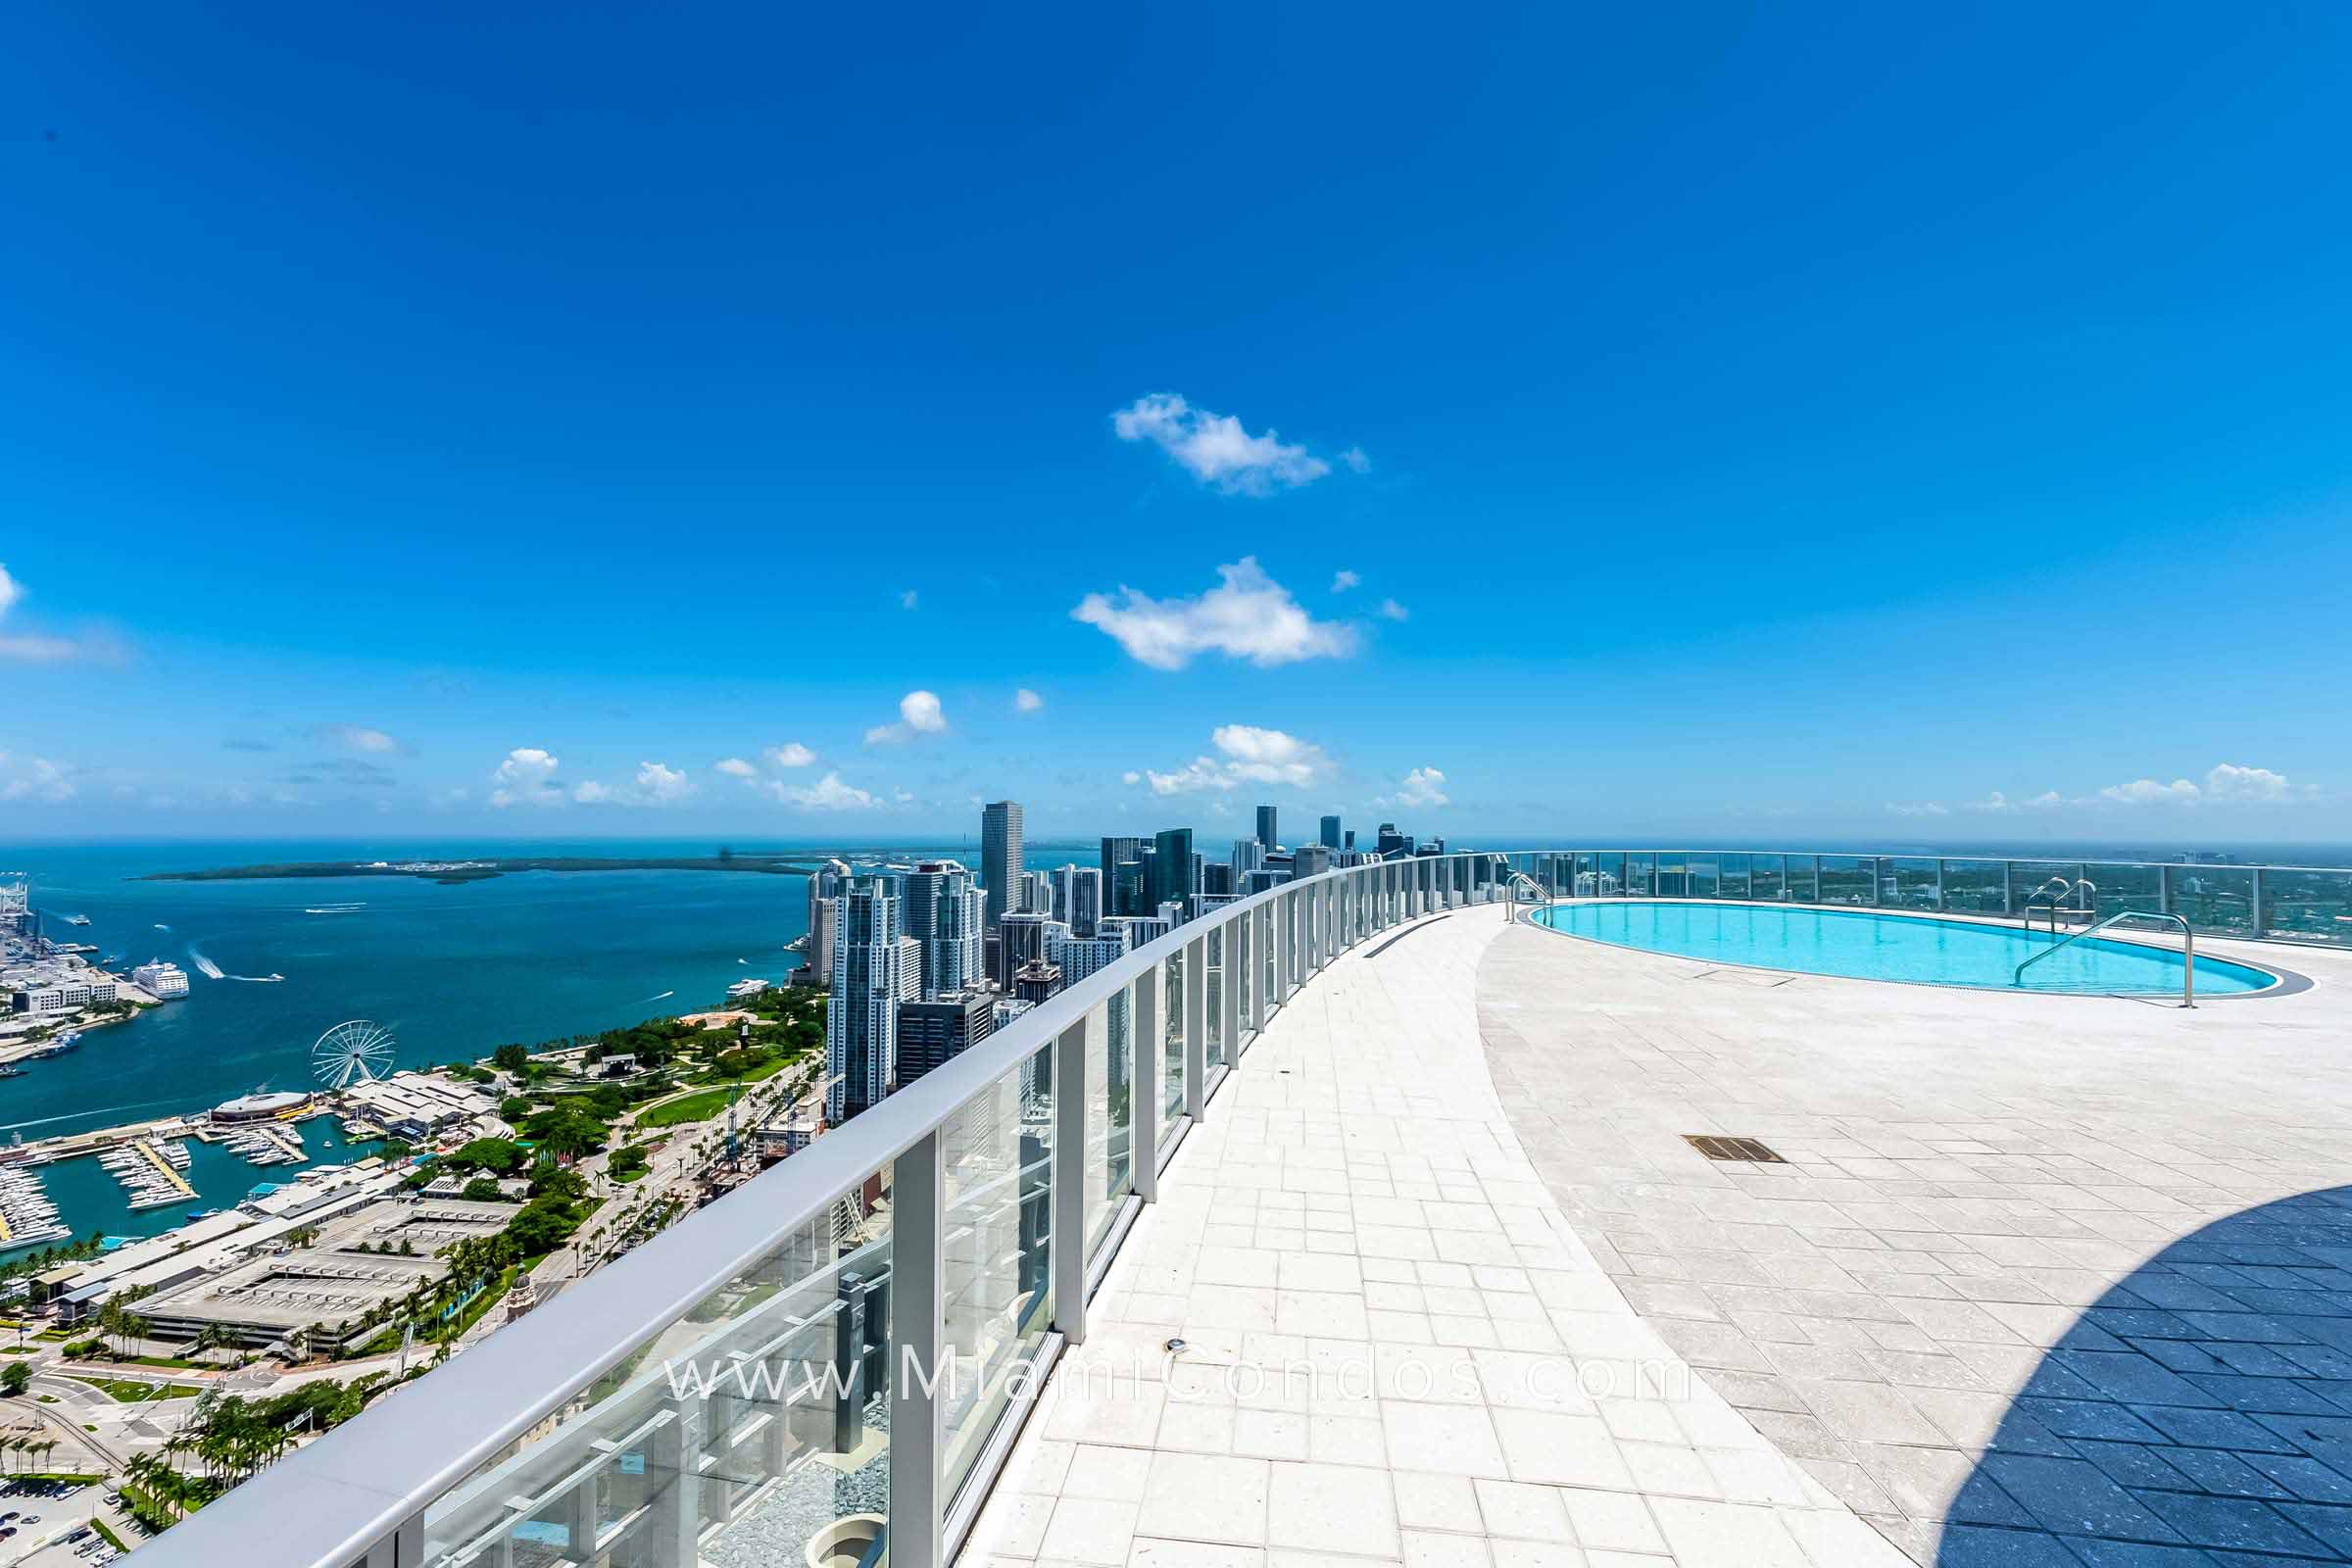 Paramount Miami Worldcenter Rooftop Pool Deck and View